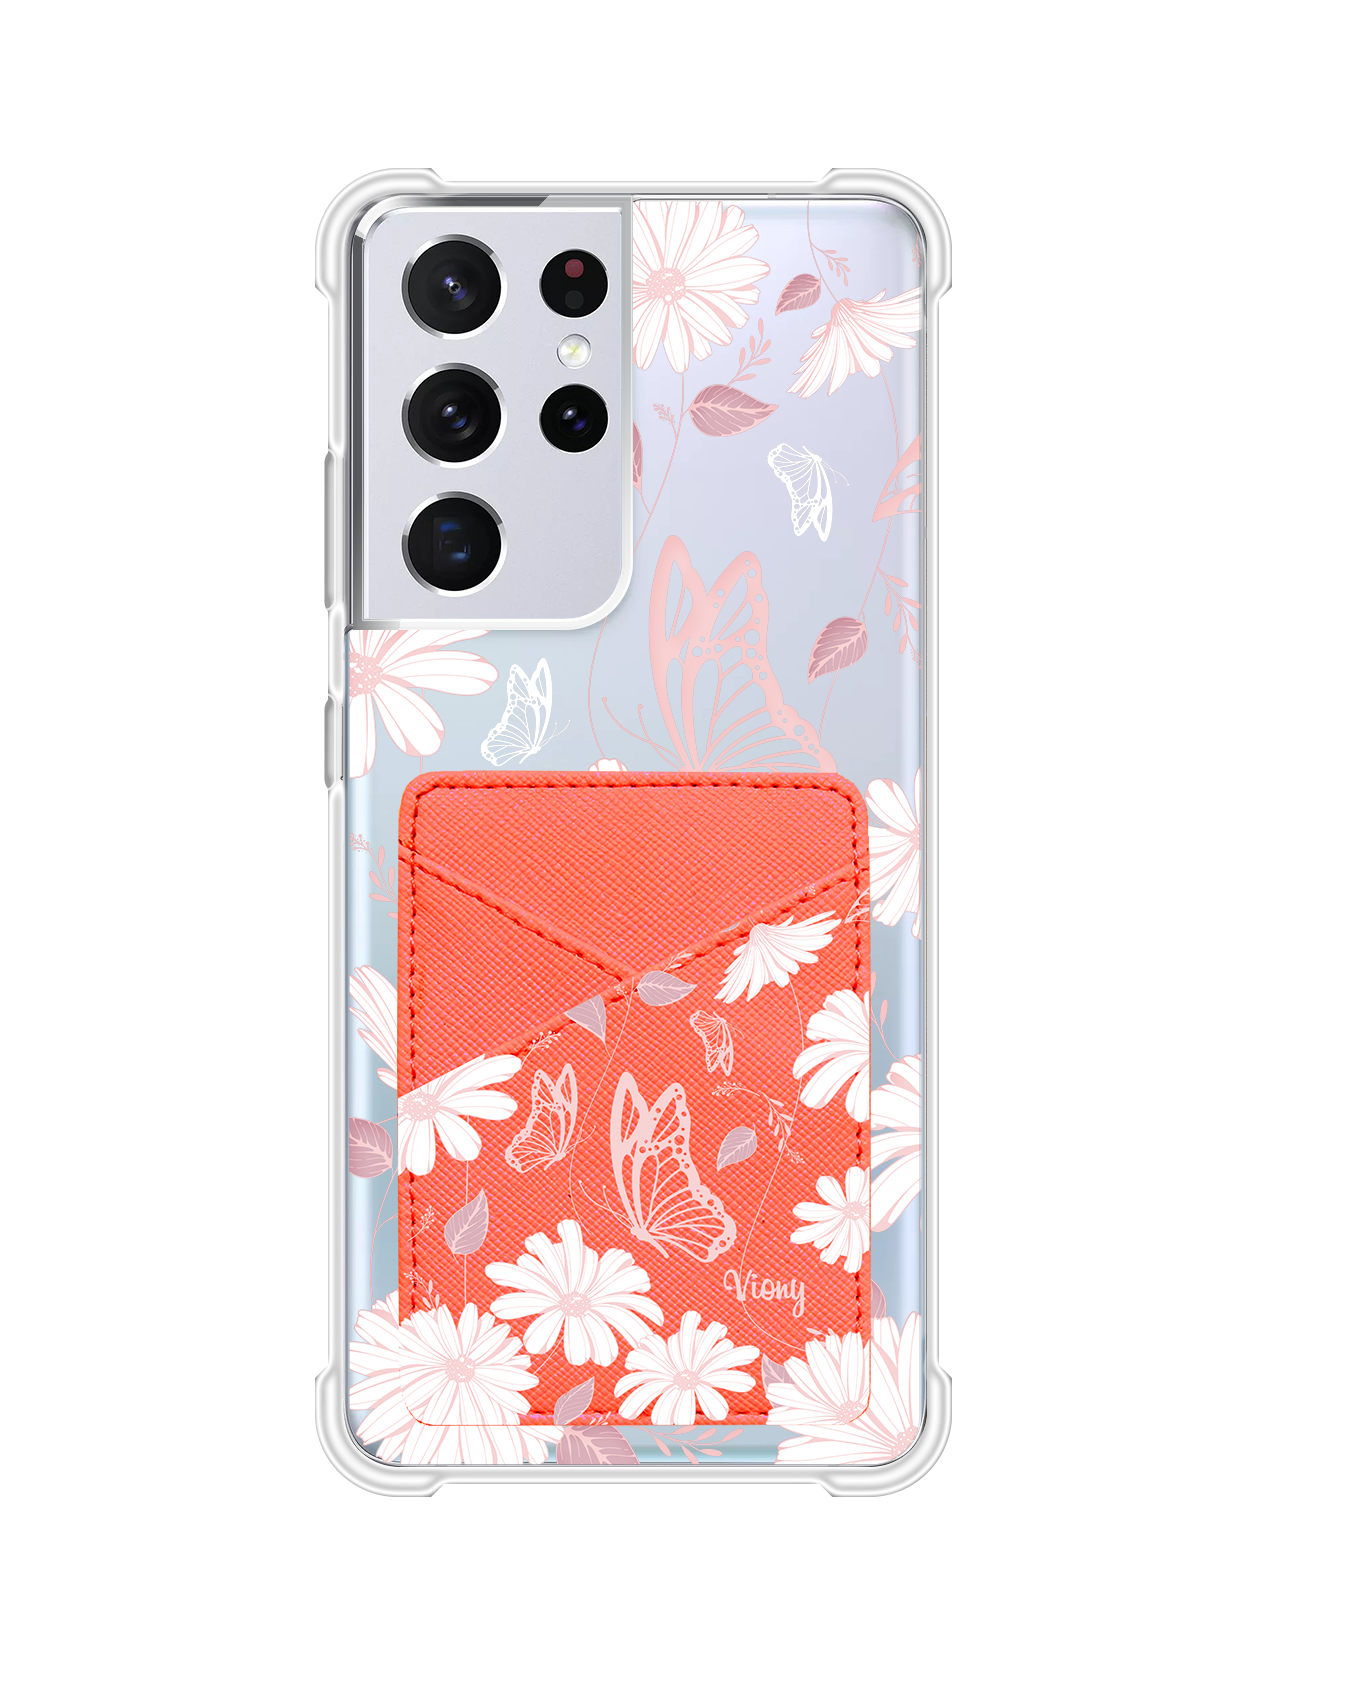 Android Phone Wallet Case - Butterfly & Daisy